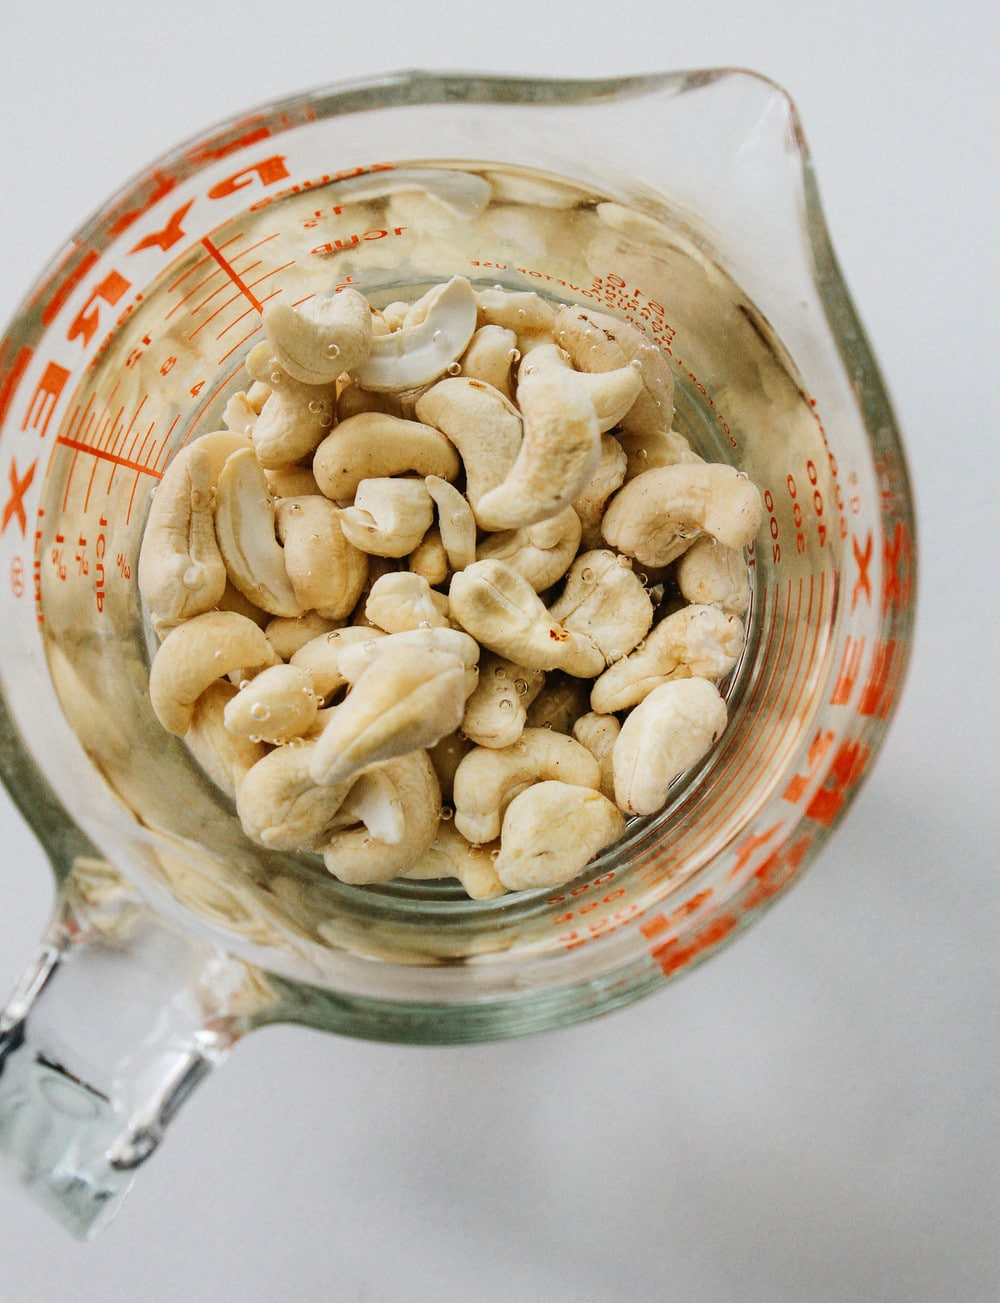 cashew soaking in water in a glass measuring cup